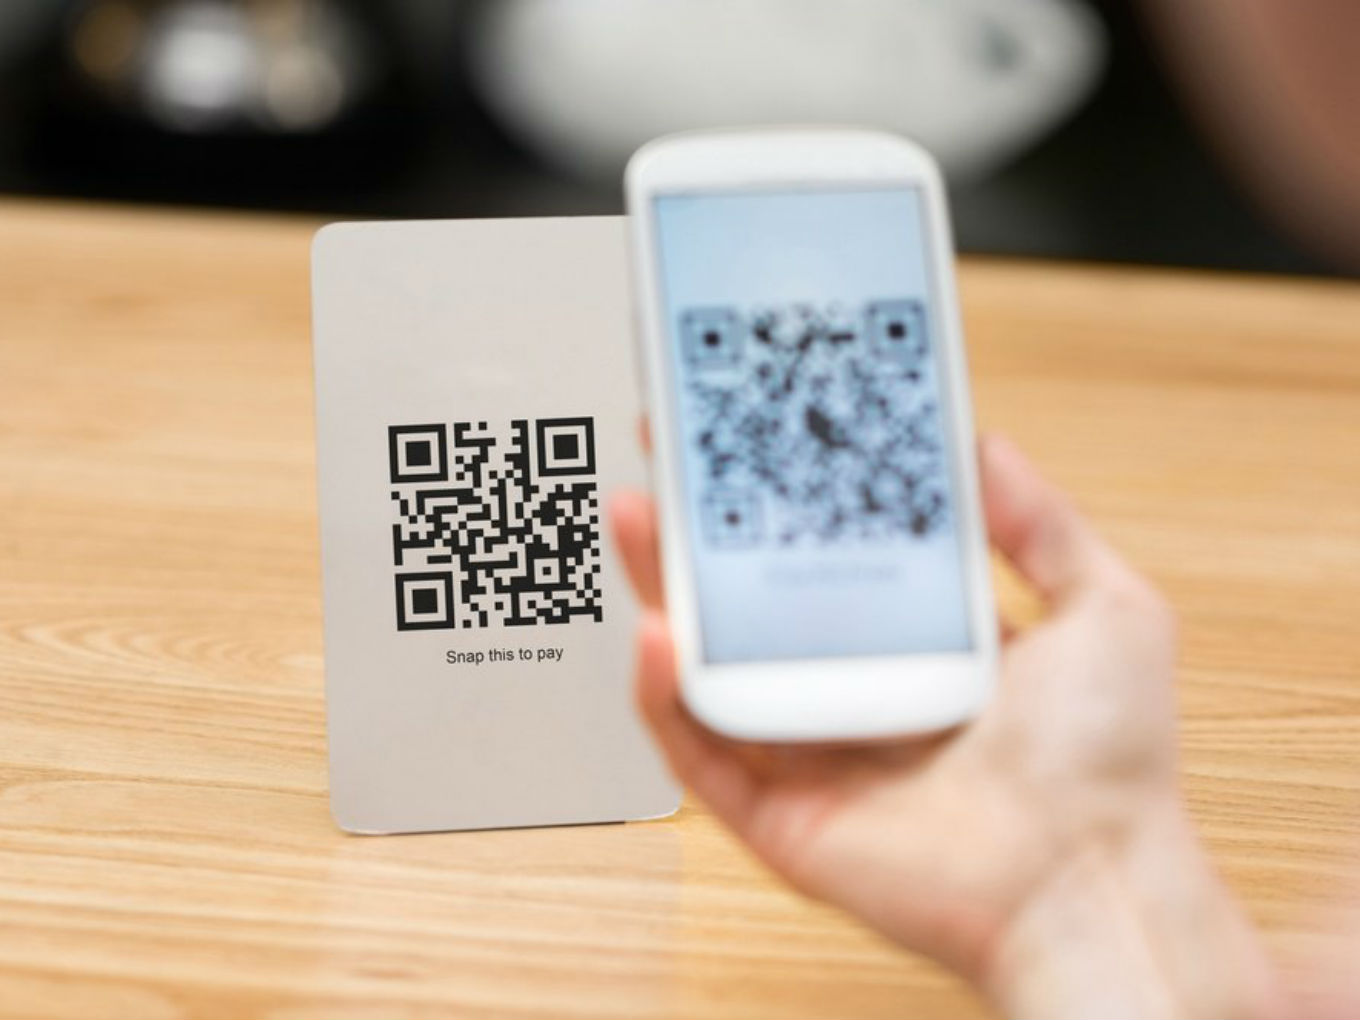 Startup News - Centre Looks To Make QR Codes Mandatory For All Shops: Report